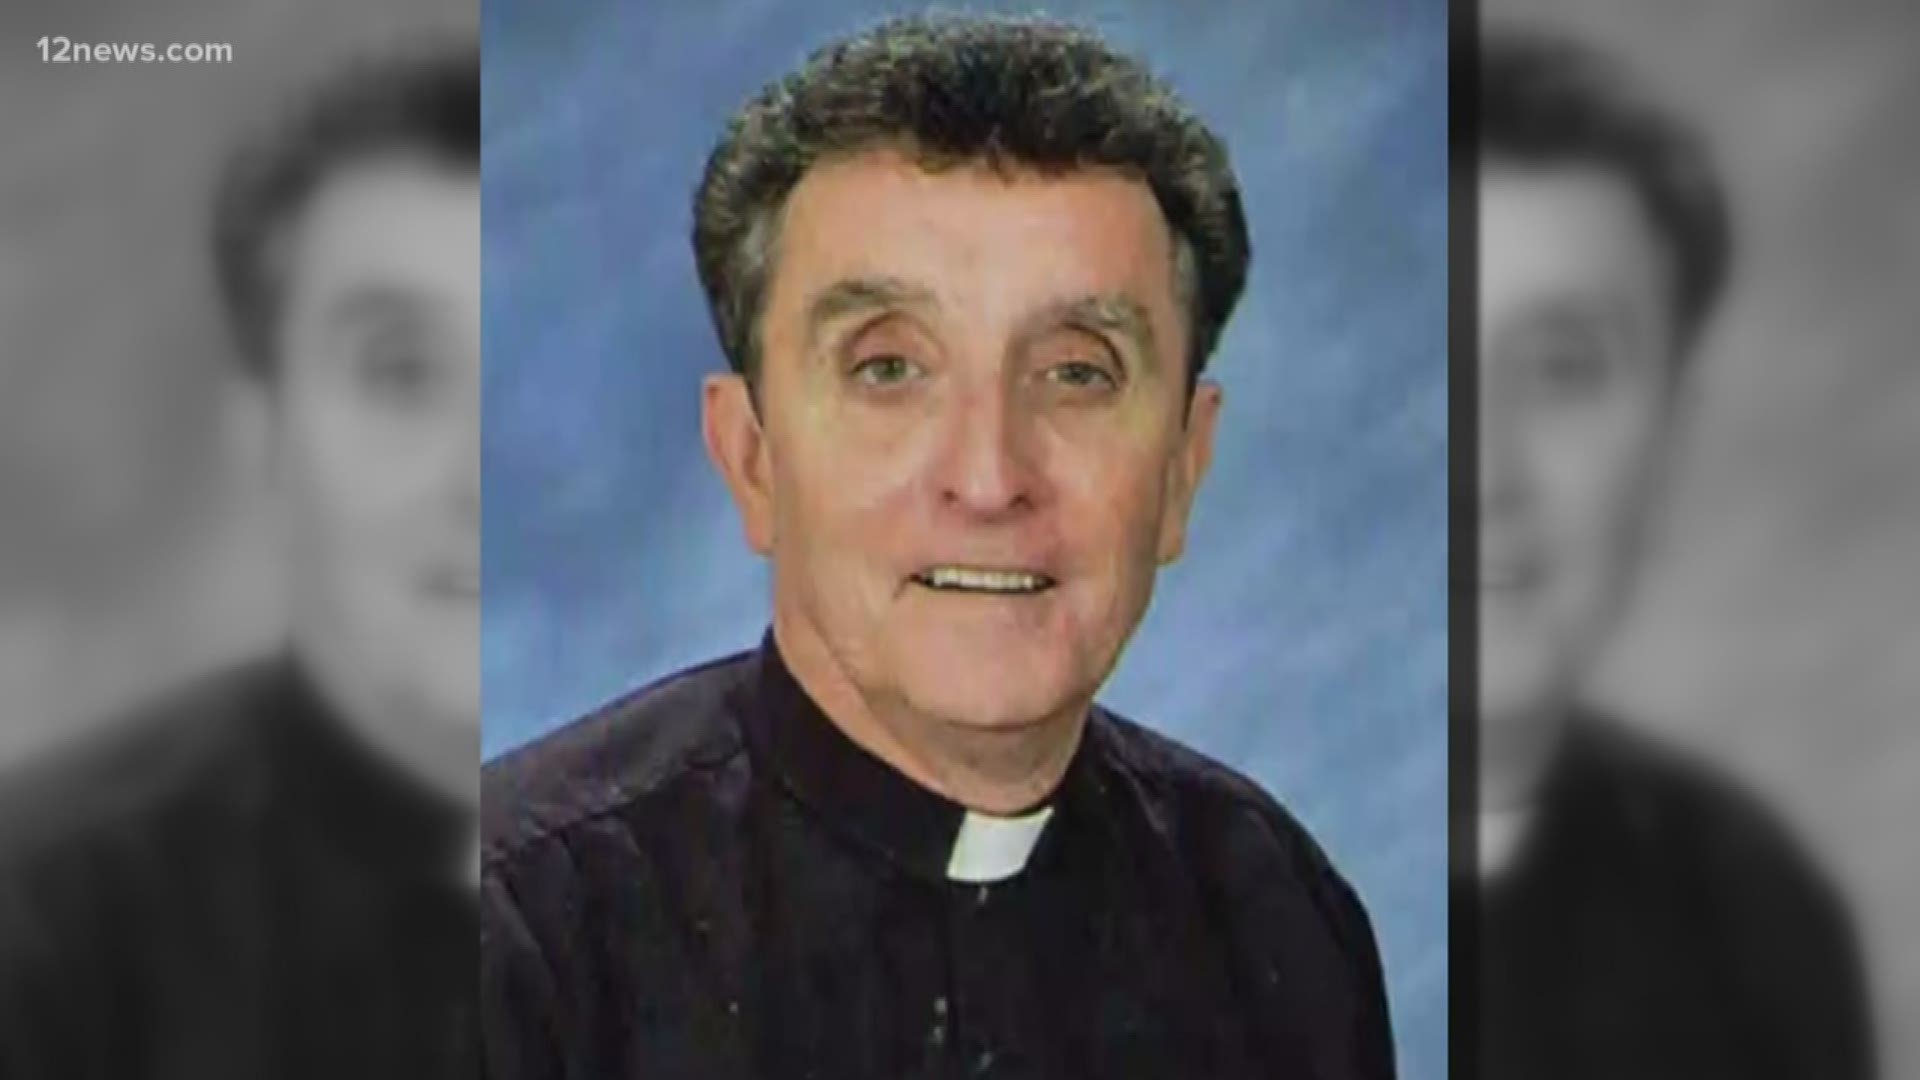 John Spaulding, a former Valley priest, is accused of sexually assaulting boys. He was supposed to be in court Friday but his lawyers say he is too sick for court.